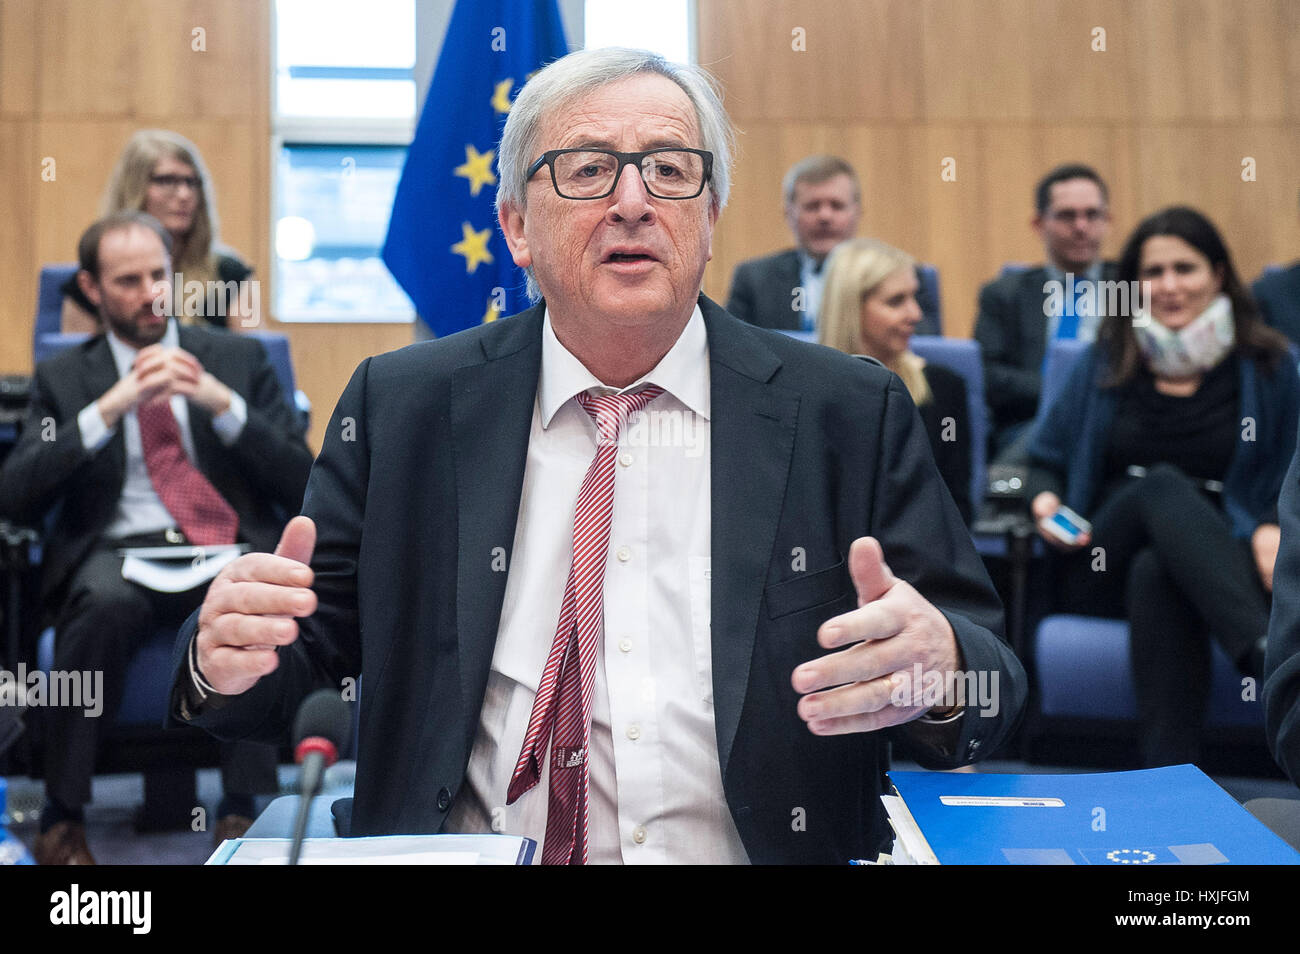 Brussels, Belgium. 29th Mar, 2017. Jean-Claude Juncker, the president of the European Commission at the start of European Commission college meeting in Brussels, Belgium on 29.03.2017 UK will trigger article 50 of the Lisbon Treaty today. Credit: ZUMA Press, Inc./Alamy Live News Stock Photo